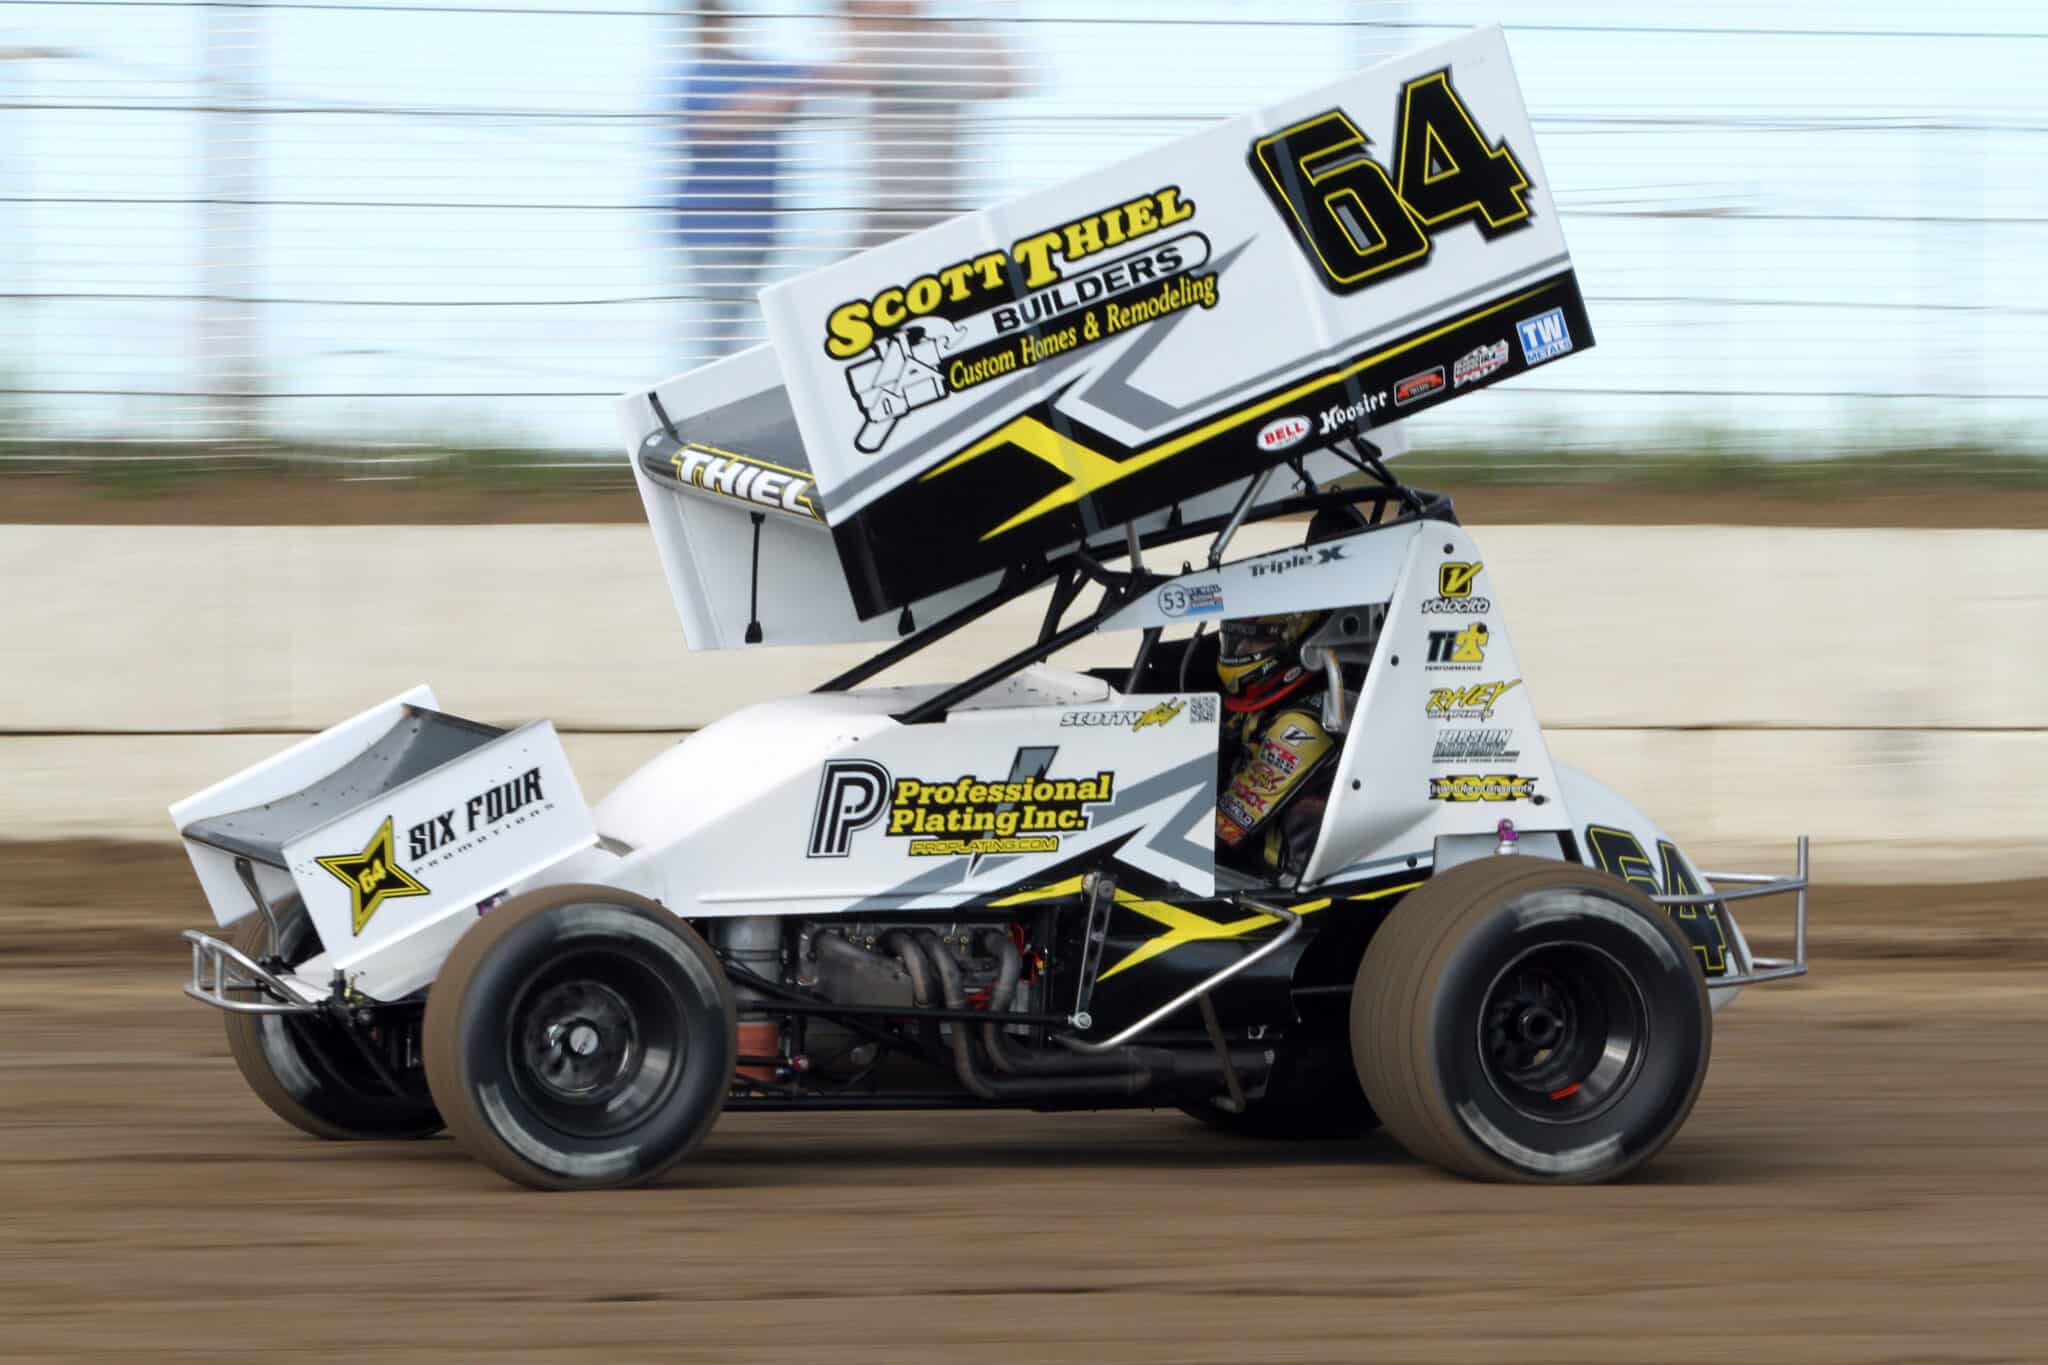 Scotty Thiel in the 64 IRA Outlaw Sprint Car